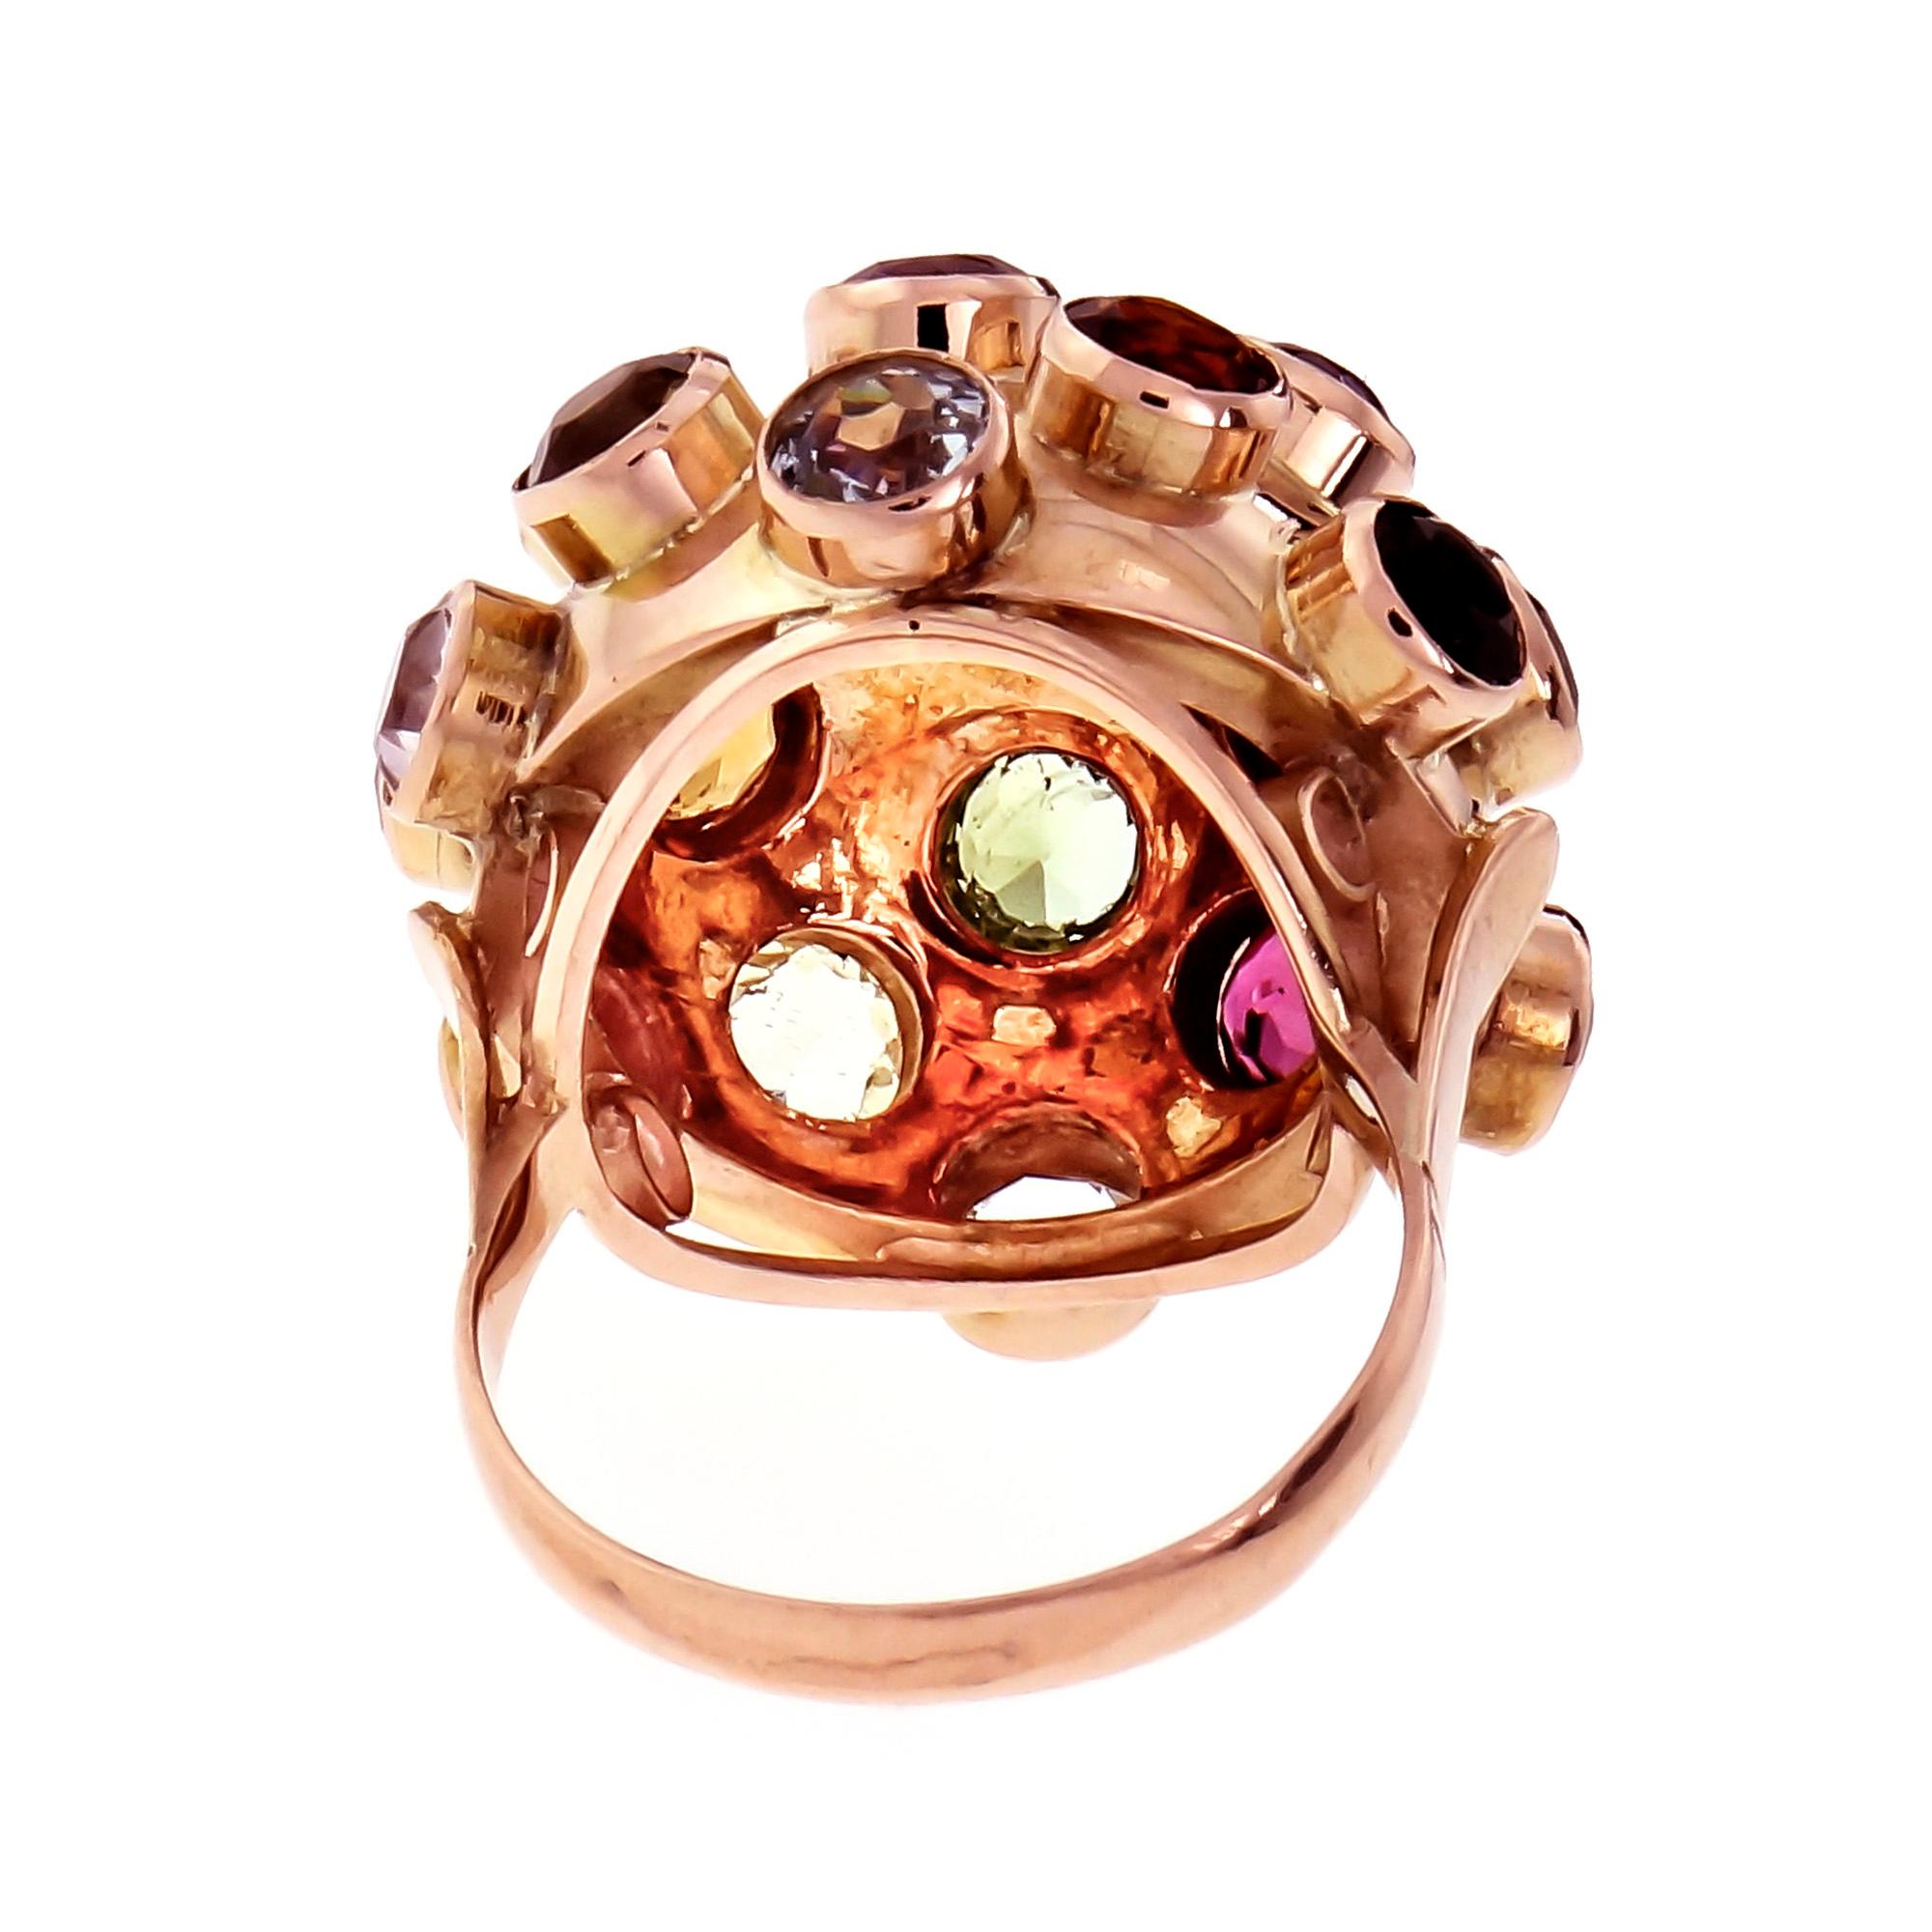  Sputnik 1960s style dome cocktail ring with multi-color natural Aqua, Blue Zircon, Amethyst, Tourmaline and Citrine gemstones all securely tube set in 18k rose gold setting. 

1 round pink Tourmaline, approx. total weight .40cts, 4.8mm 
18 round